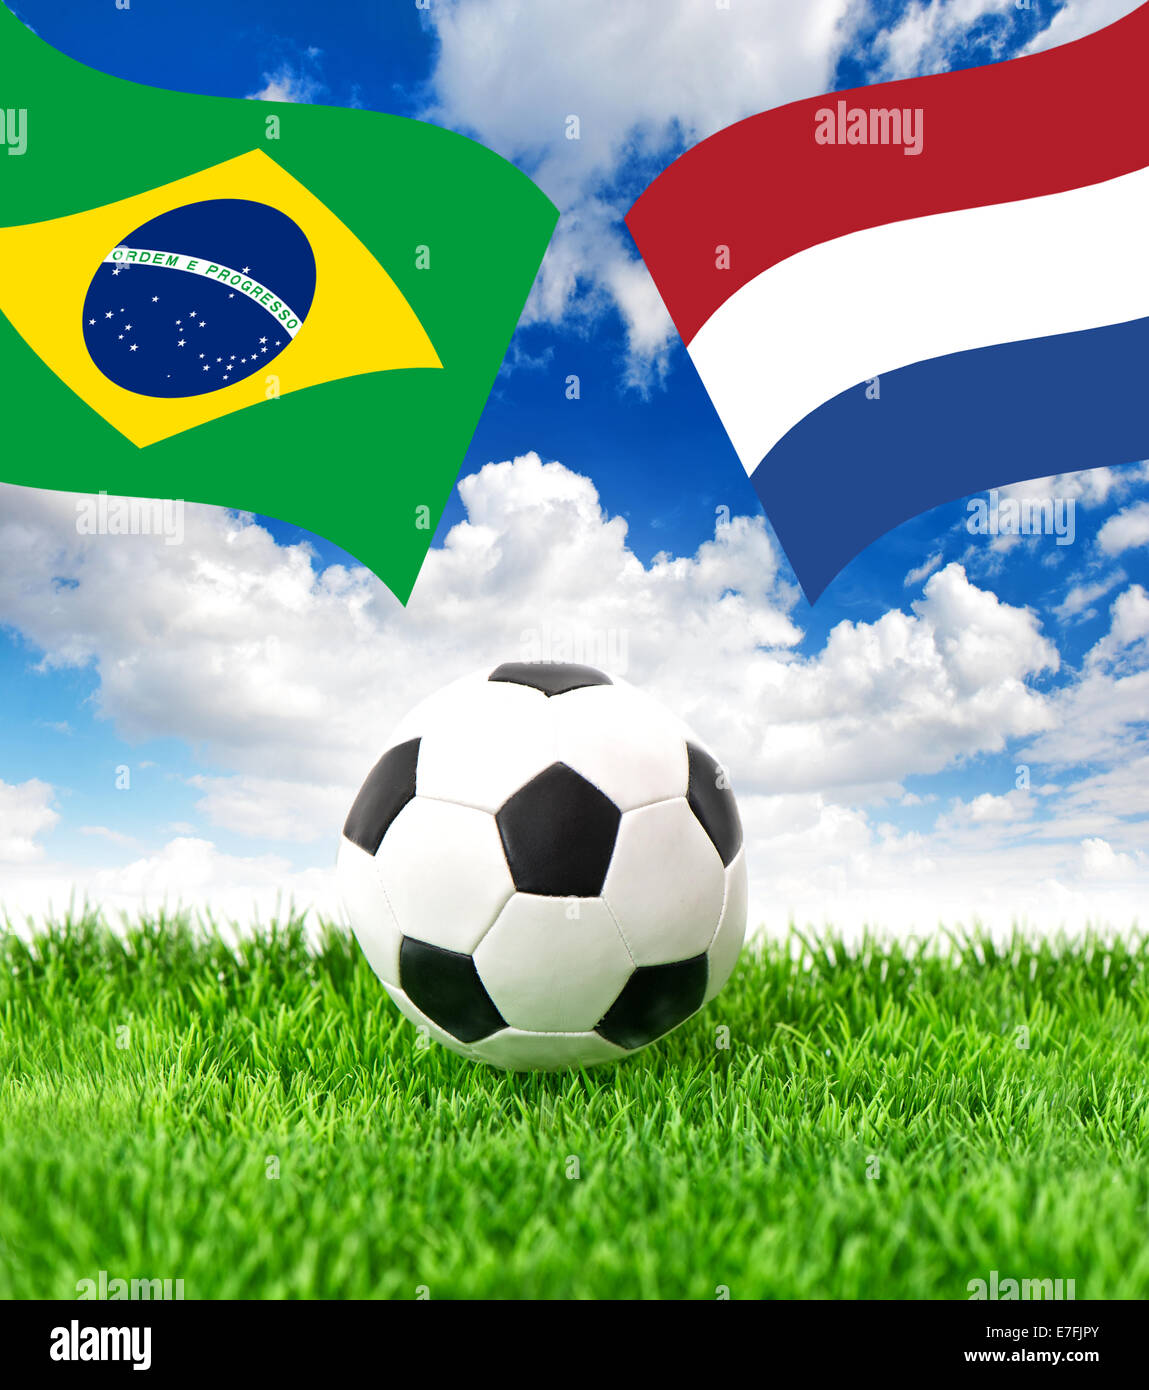 Soccer ball on green grass and national flags of Brazil and Netherlands over dramatic blue sky. Collage Stock Photo